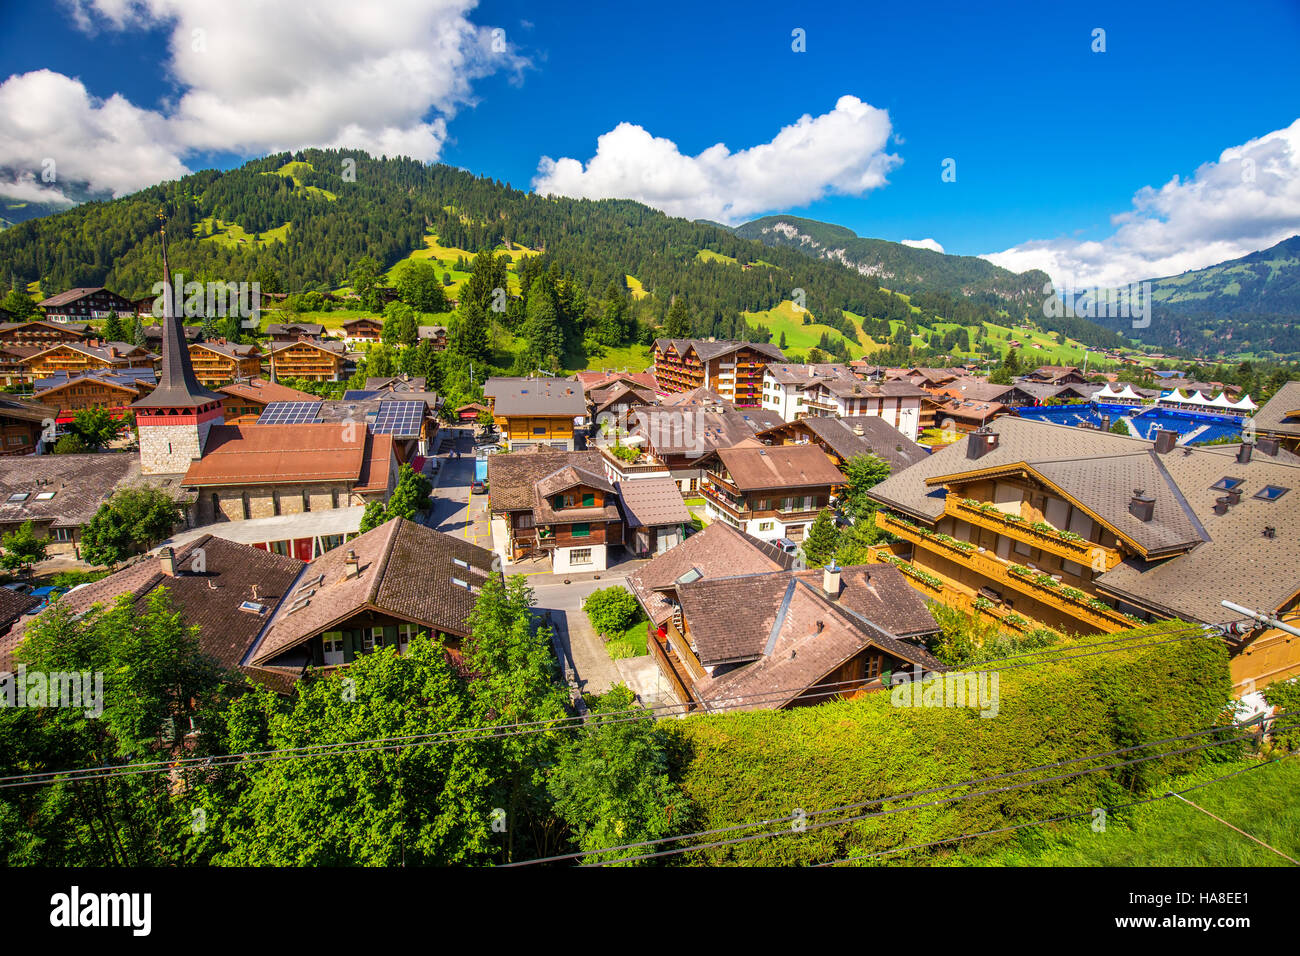 Old city center of Gstaad town in Swiss Alps, famous ski resort in canton Bern, Switzerland. Stock Photo